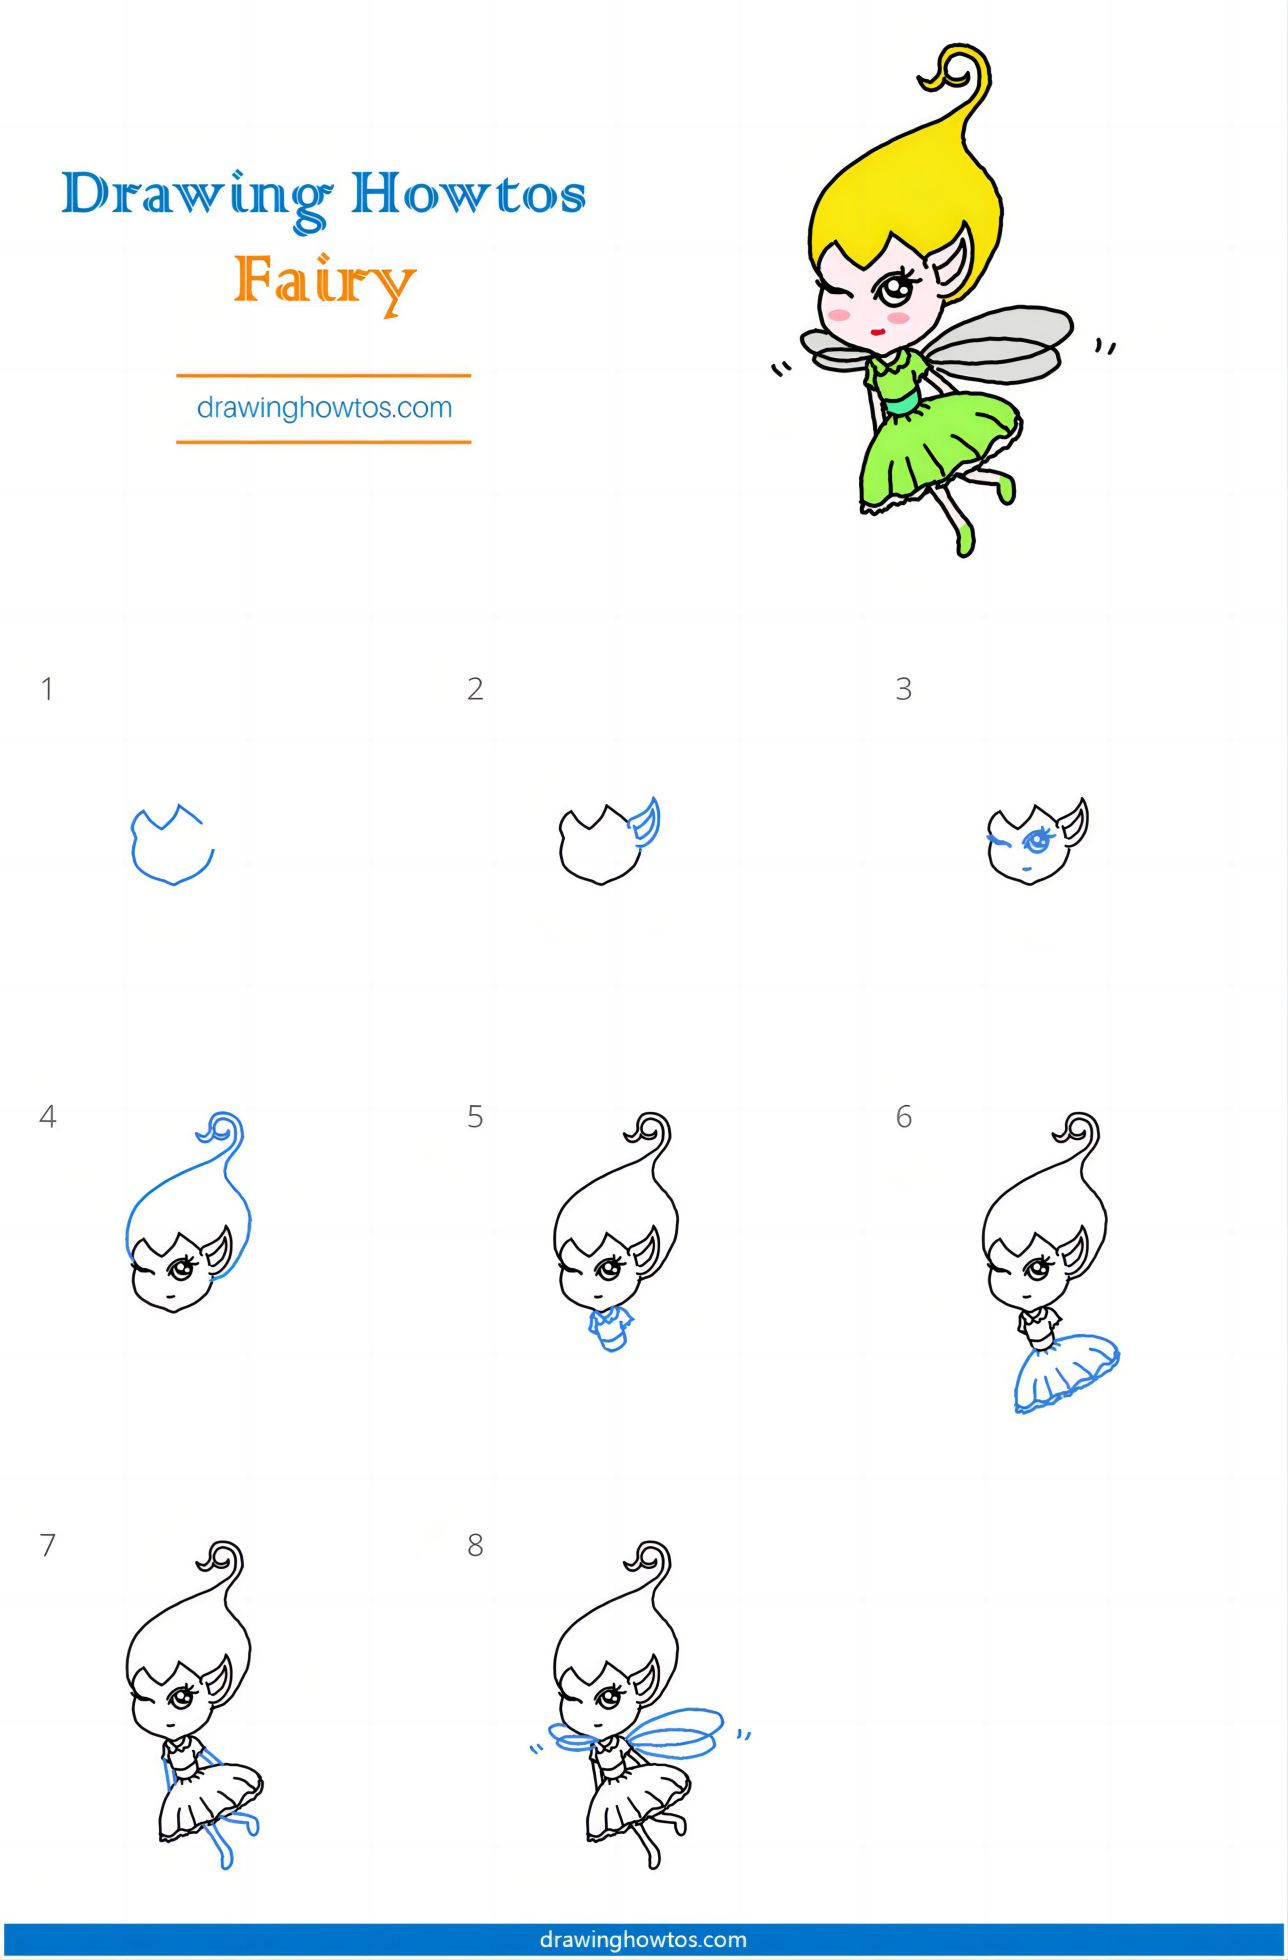 How to Draw a Fairy Step by Step